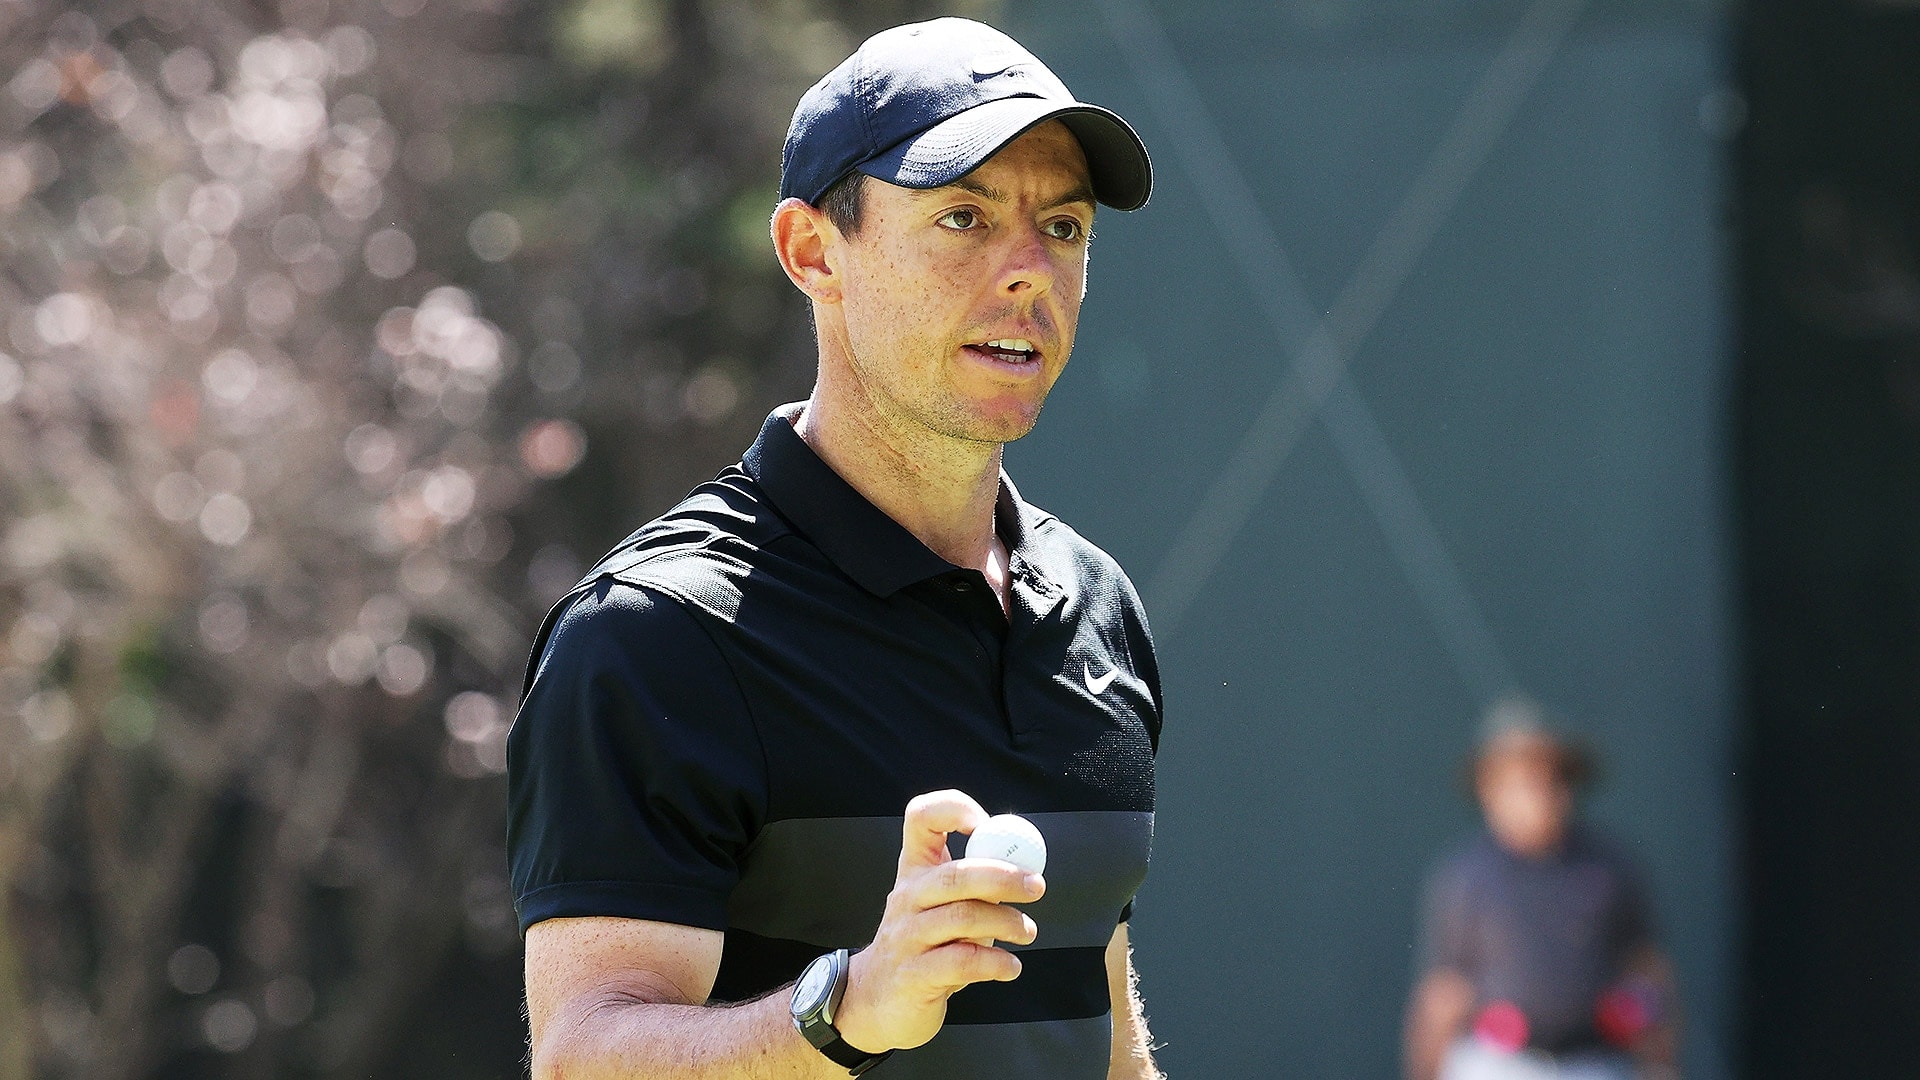 How to Bet on the US Open 2022 pga odds betonline sportsbook promo code Rory McIlroy